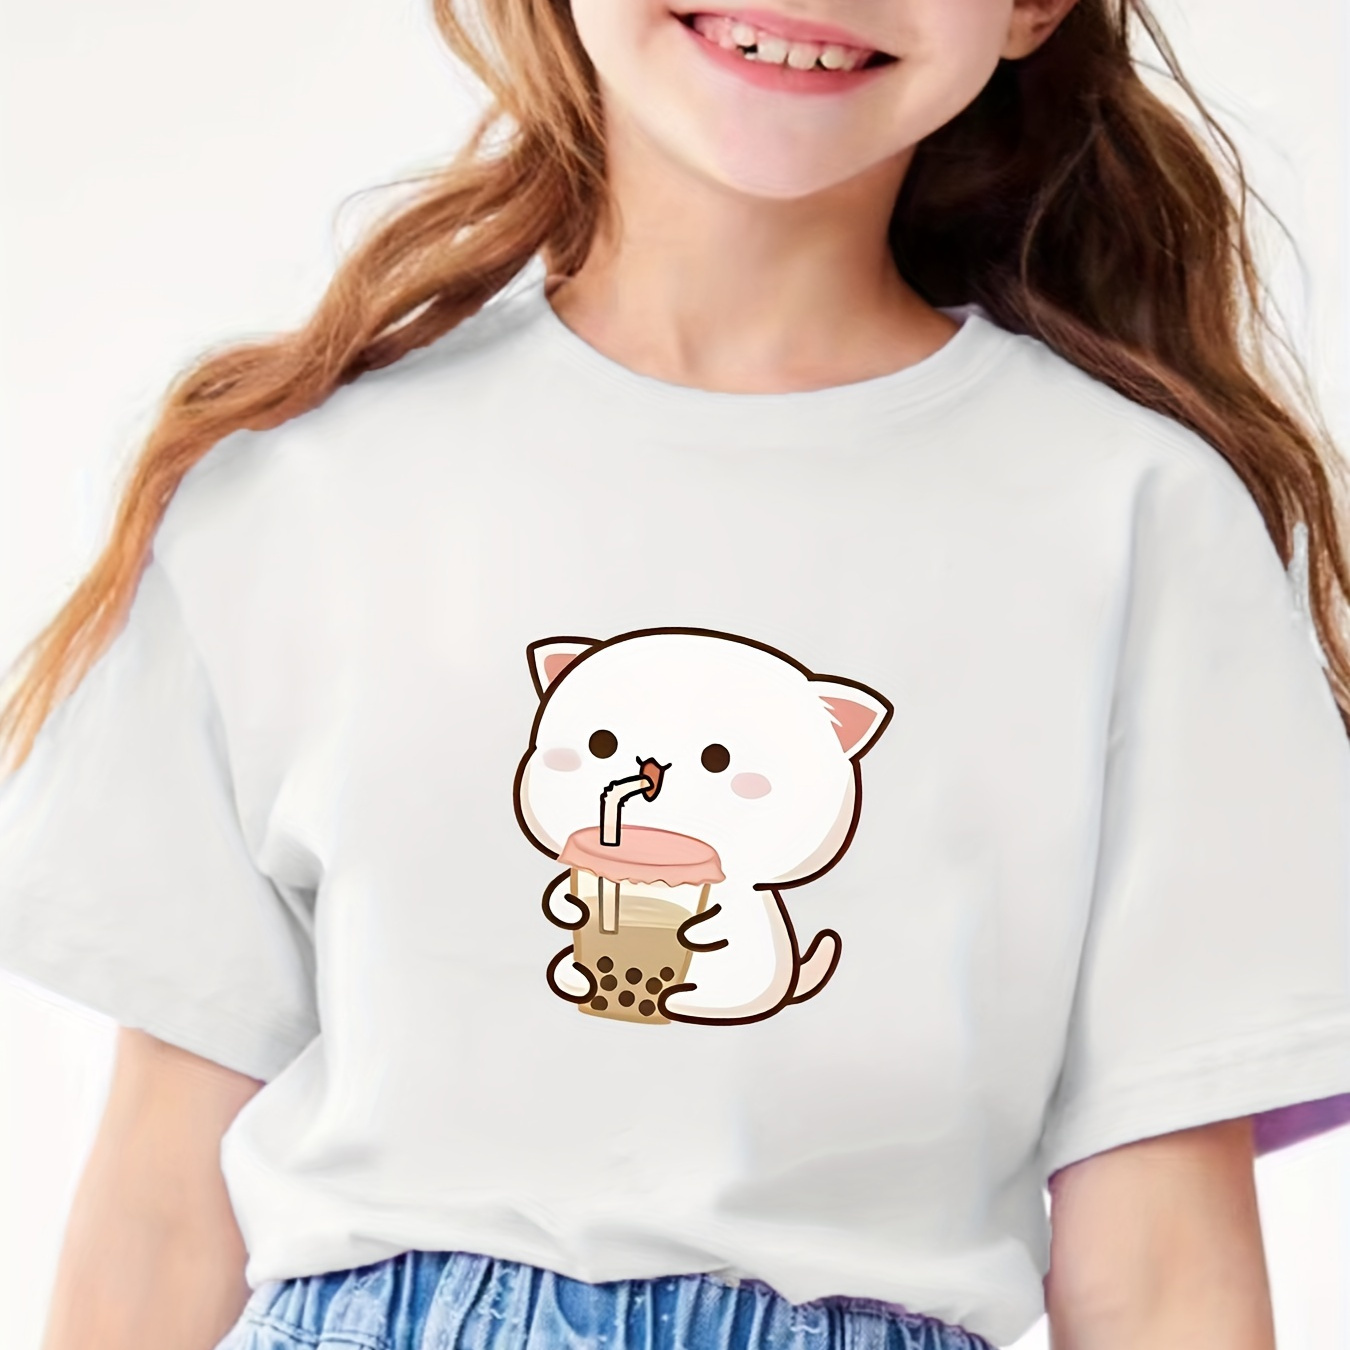 

Cartoon Cat With Bubble Tea Graphic Print, Girls' Casual Crew Neck Short Sleeve T-shirt, Comfy Top Clothes For Spring And Summer For Outdoor Activities